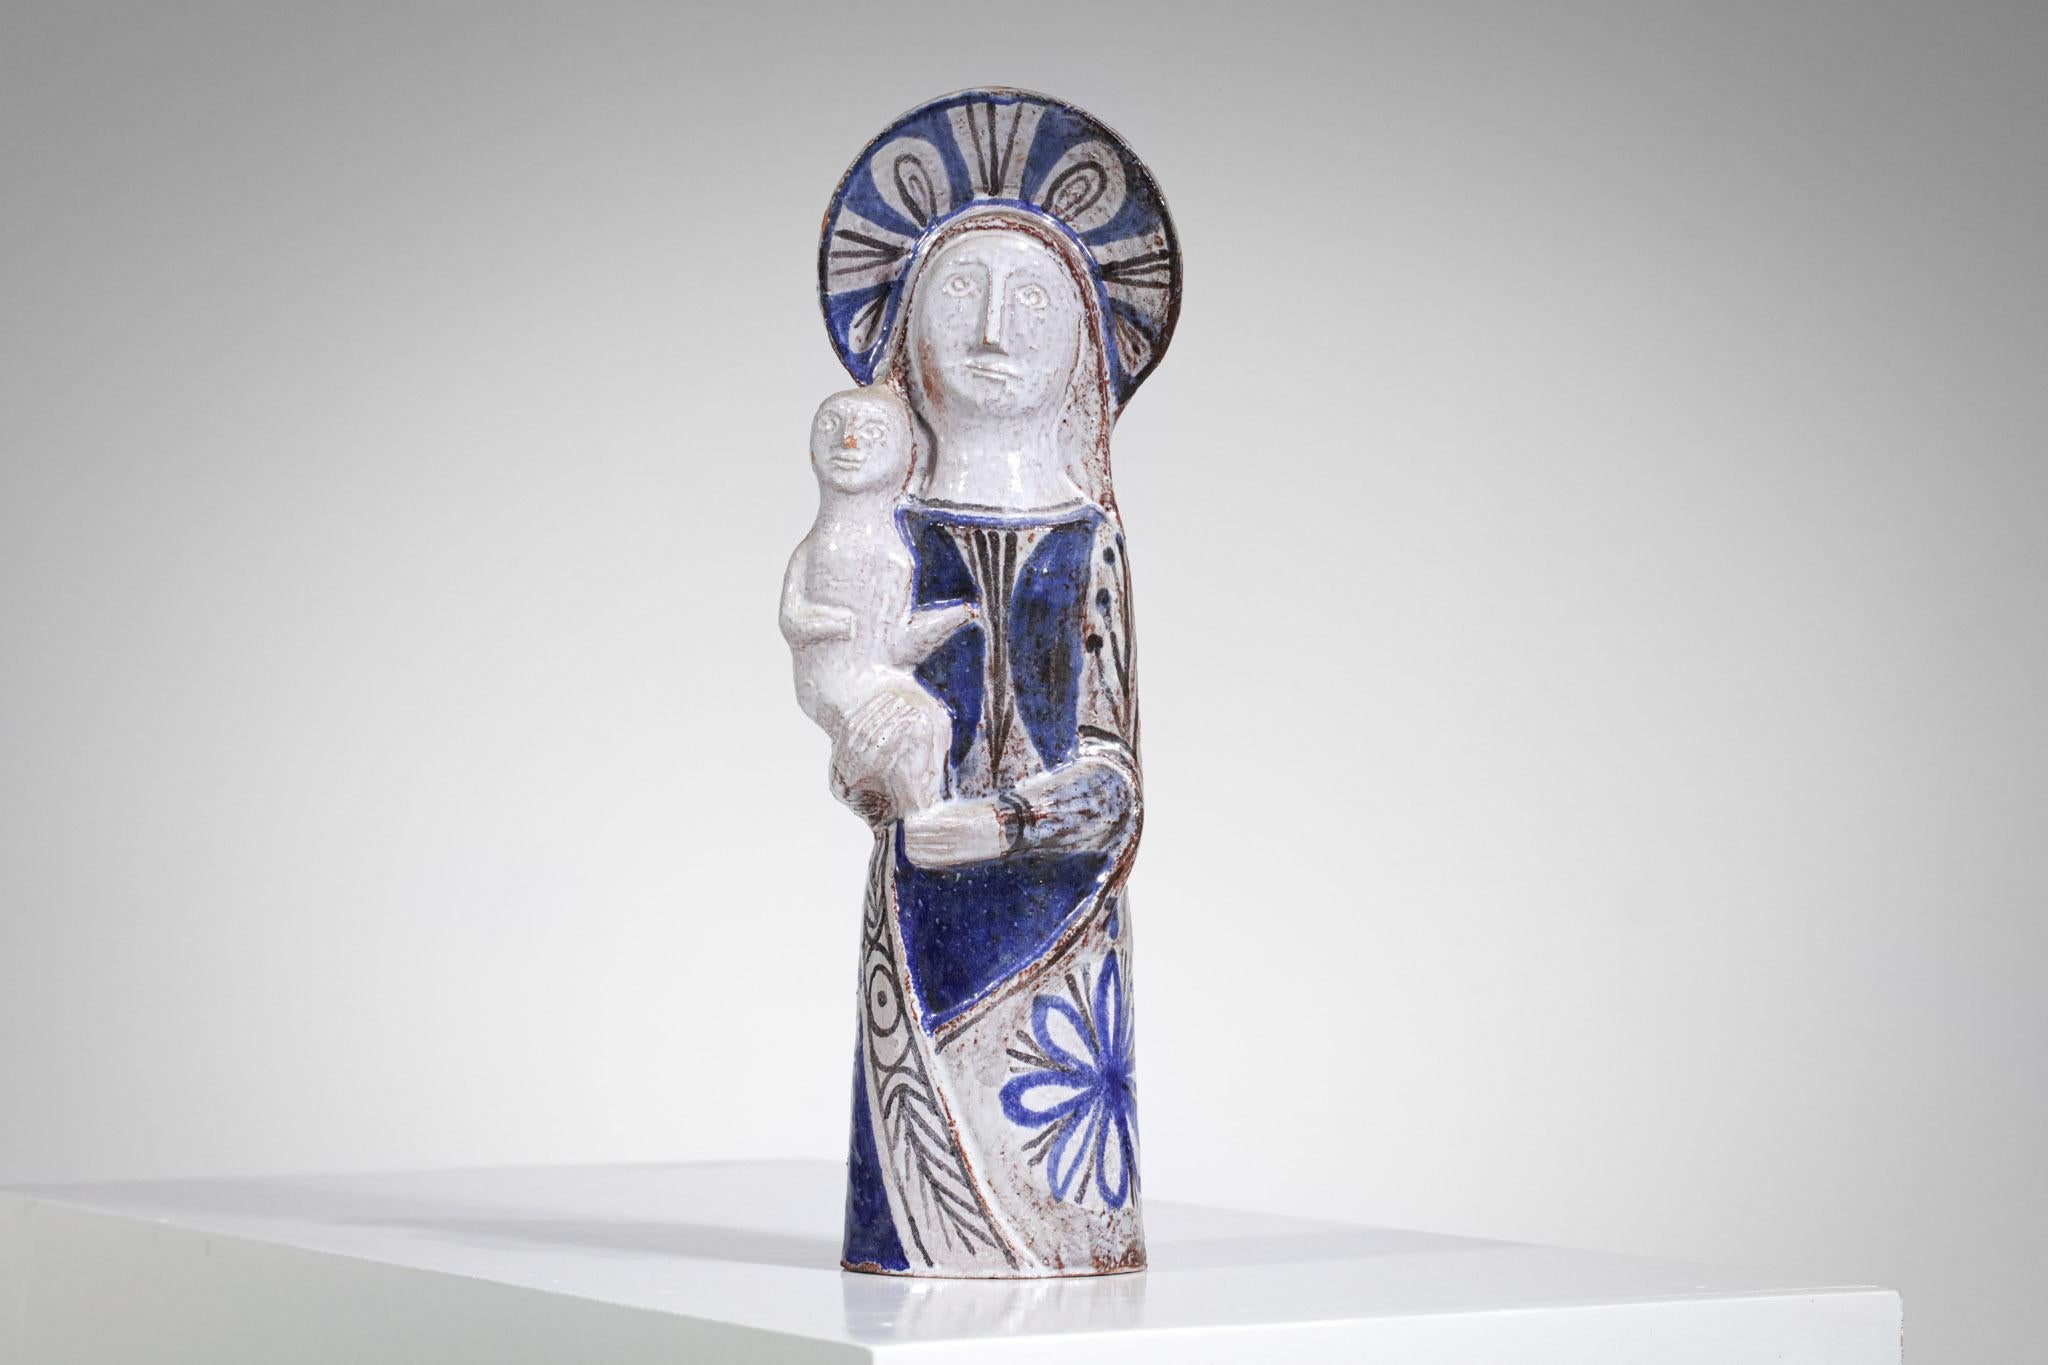 Mid-20th Century Virgin and Child, ceramic by the French artist Jean Derval 1960's - F422 For Sale